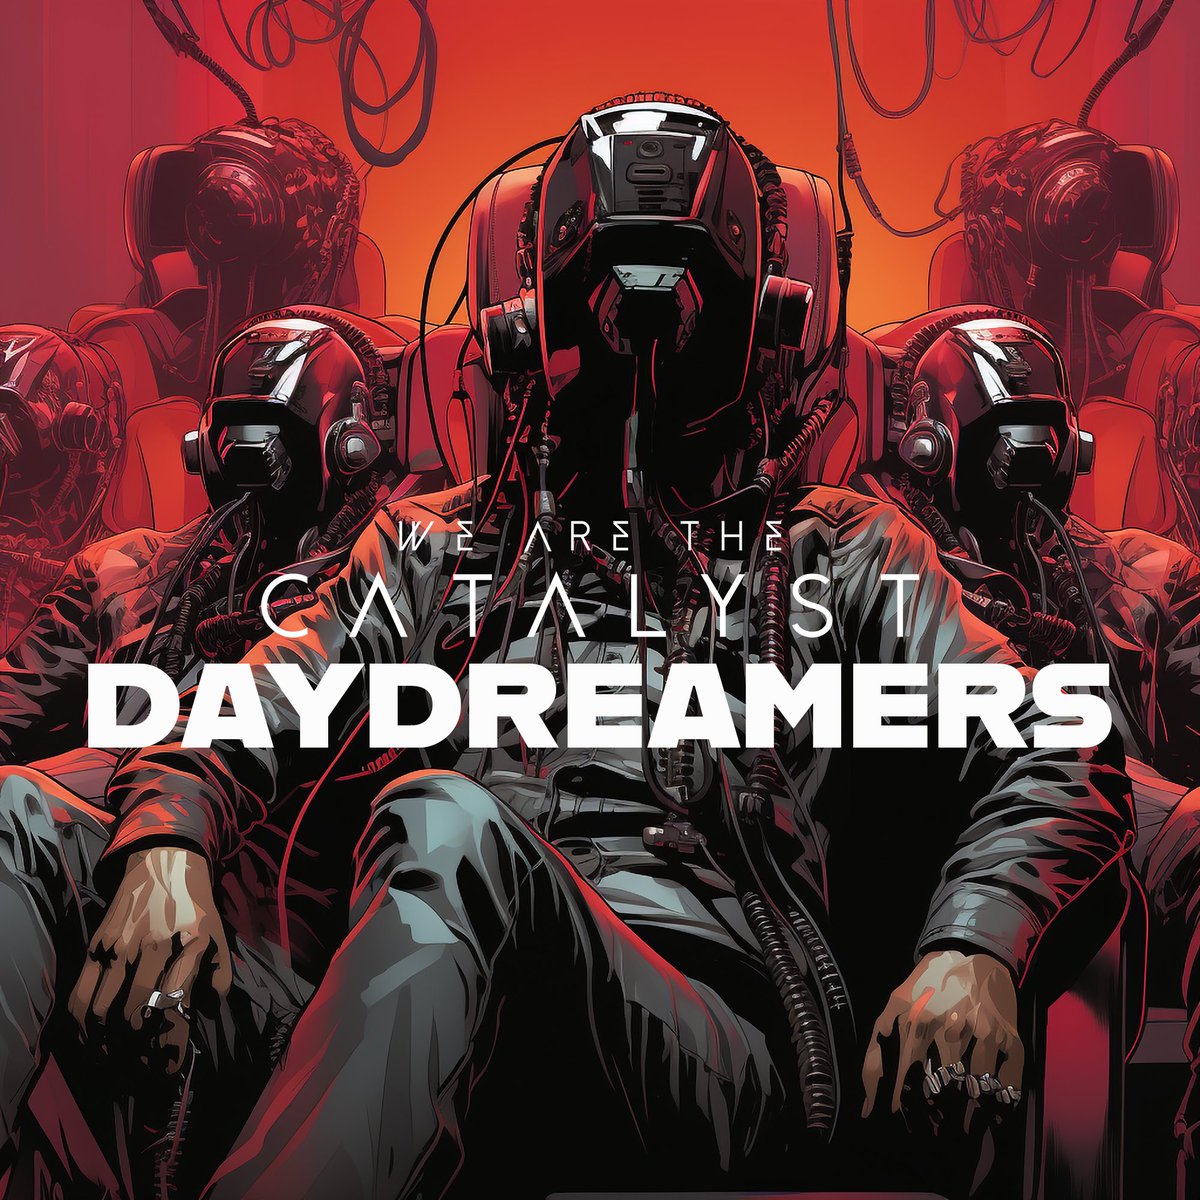 Our latest single “Daydreamers” is out now! Check it out on your favorite streaming platform or buy it on your favorite e-store! Use this link to listen on your favorite platform: hypeddit.com/wearethecataly…